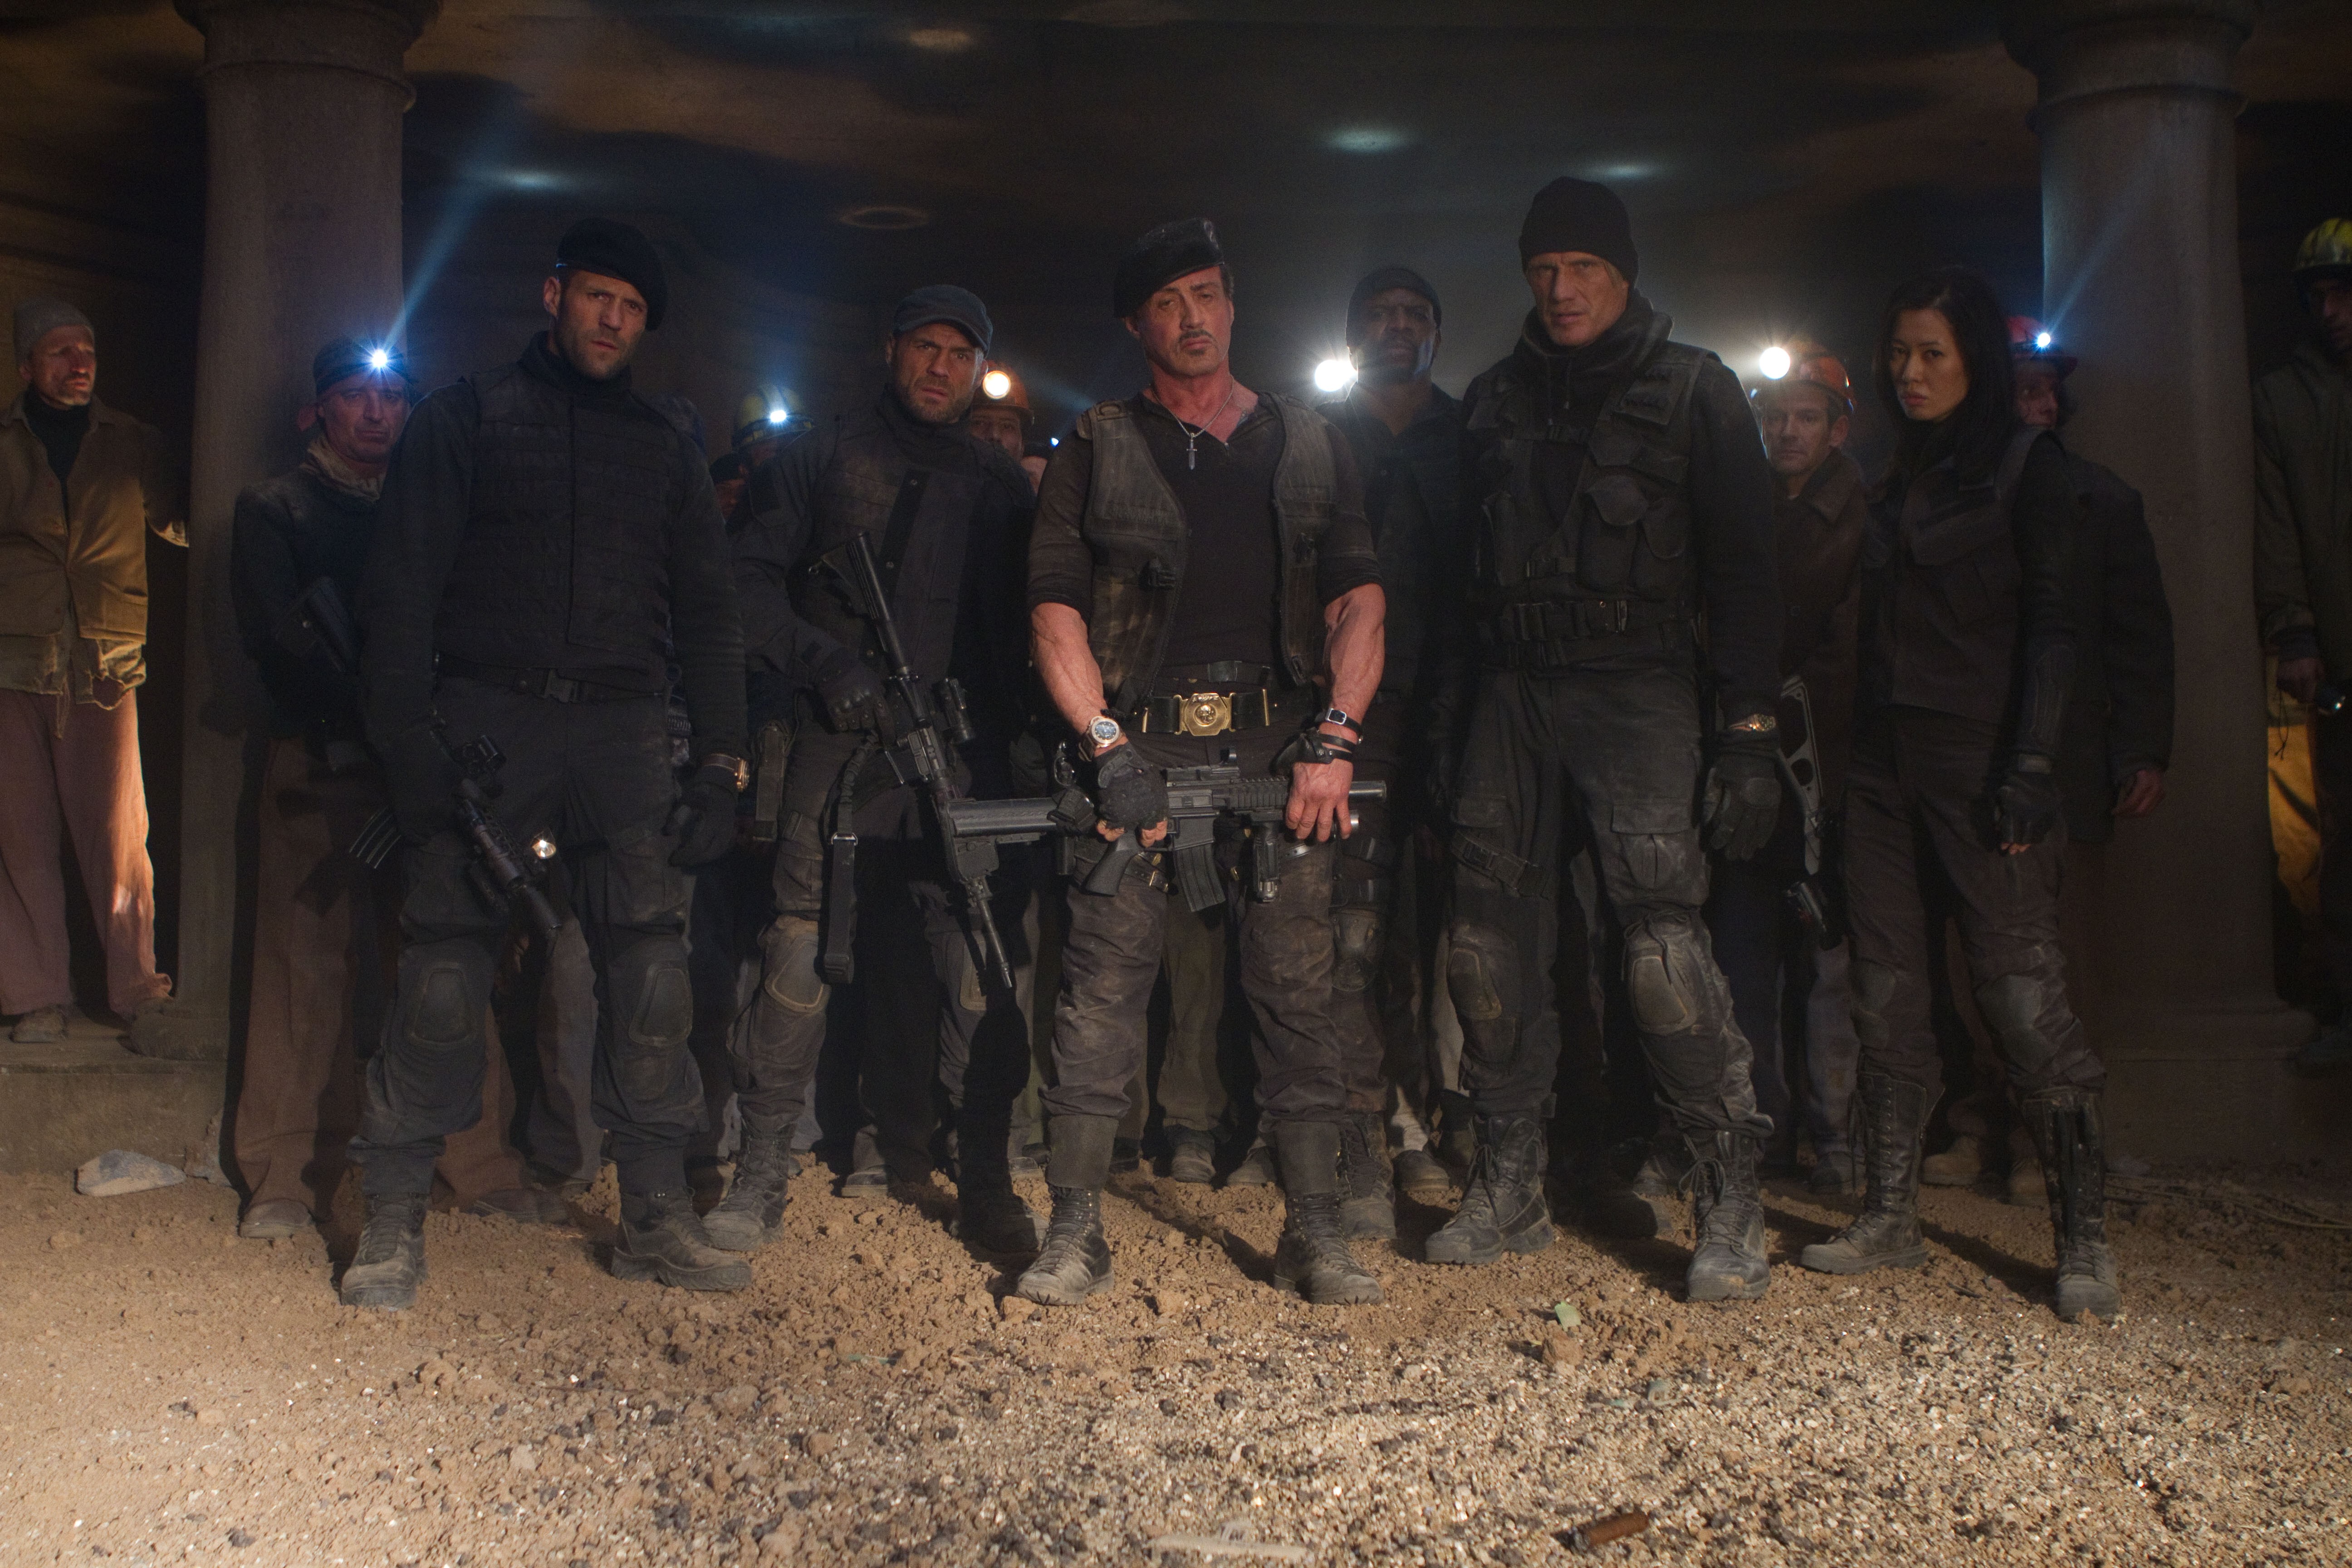 movie, the expendables 2, barney ross, dolph lundgren, gunnar jensen, hale caesar, jason statham, lee christmas, maggie (the expendables), nan yu, randy couture, sylvester stallone, terry crews, toll road, the expendables